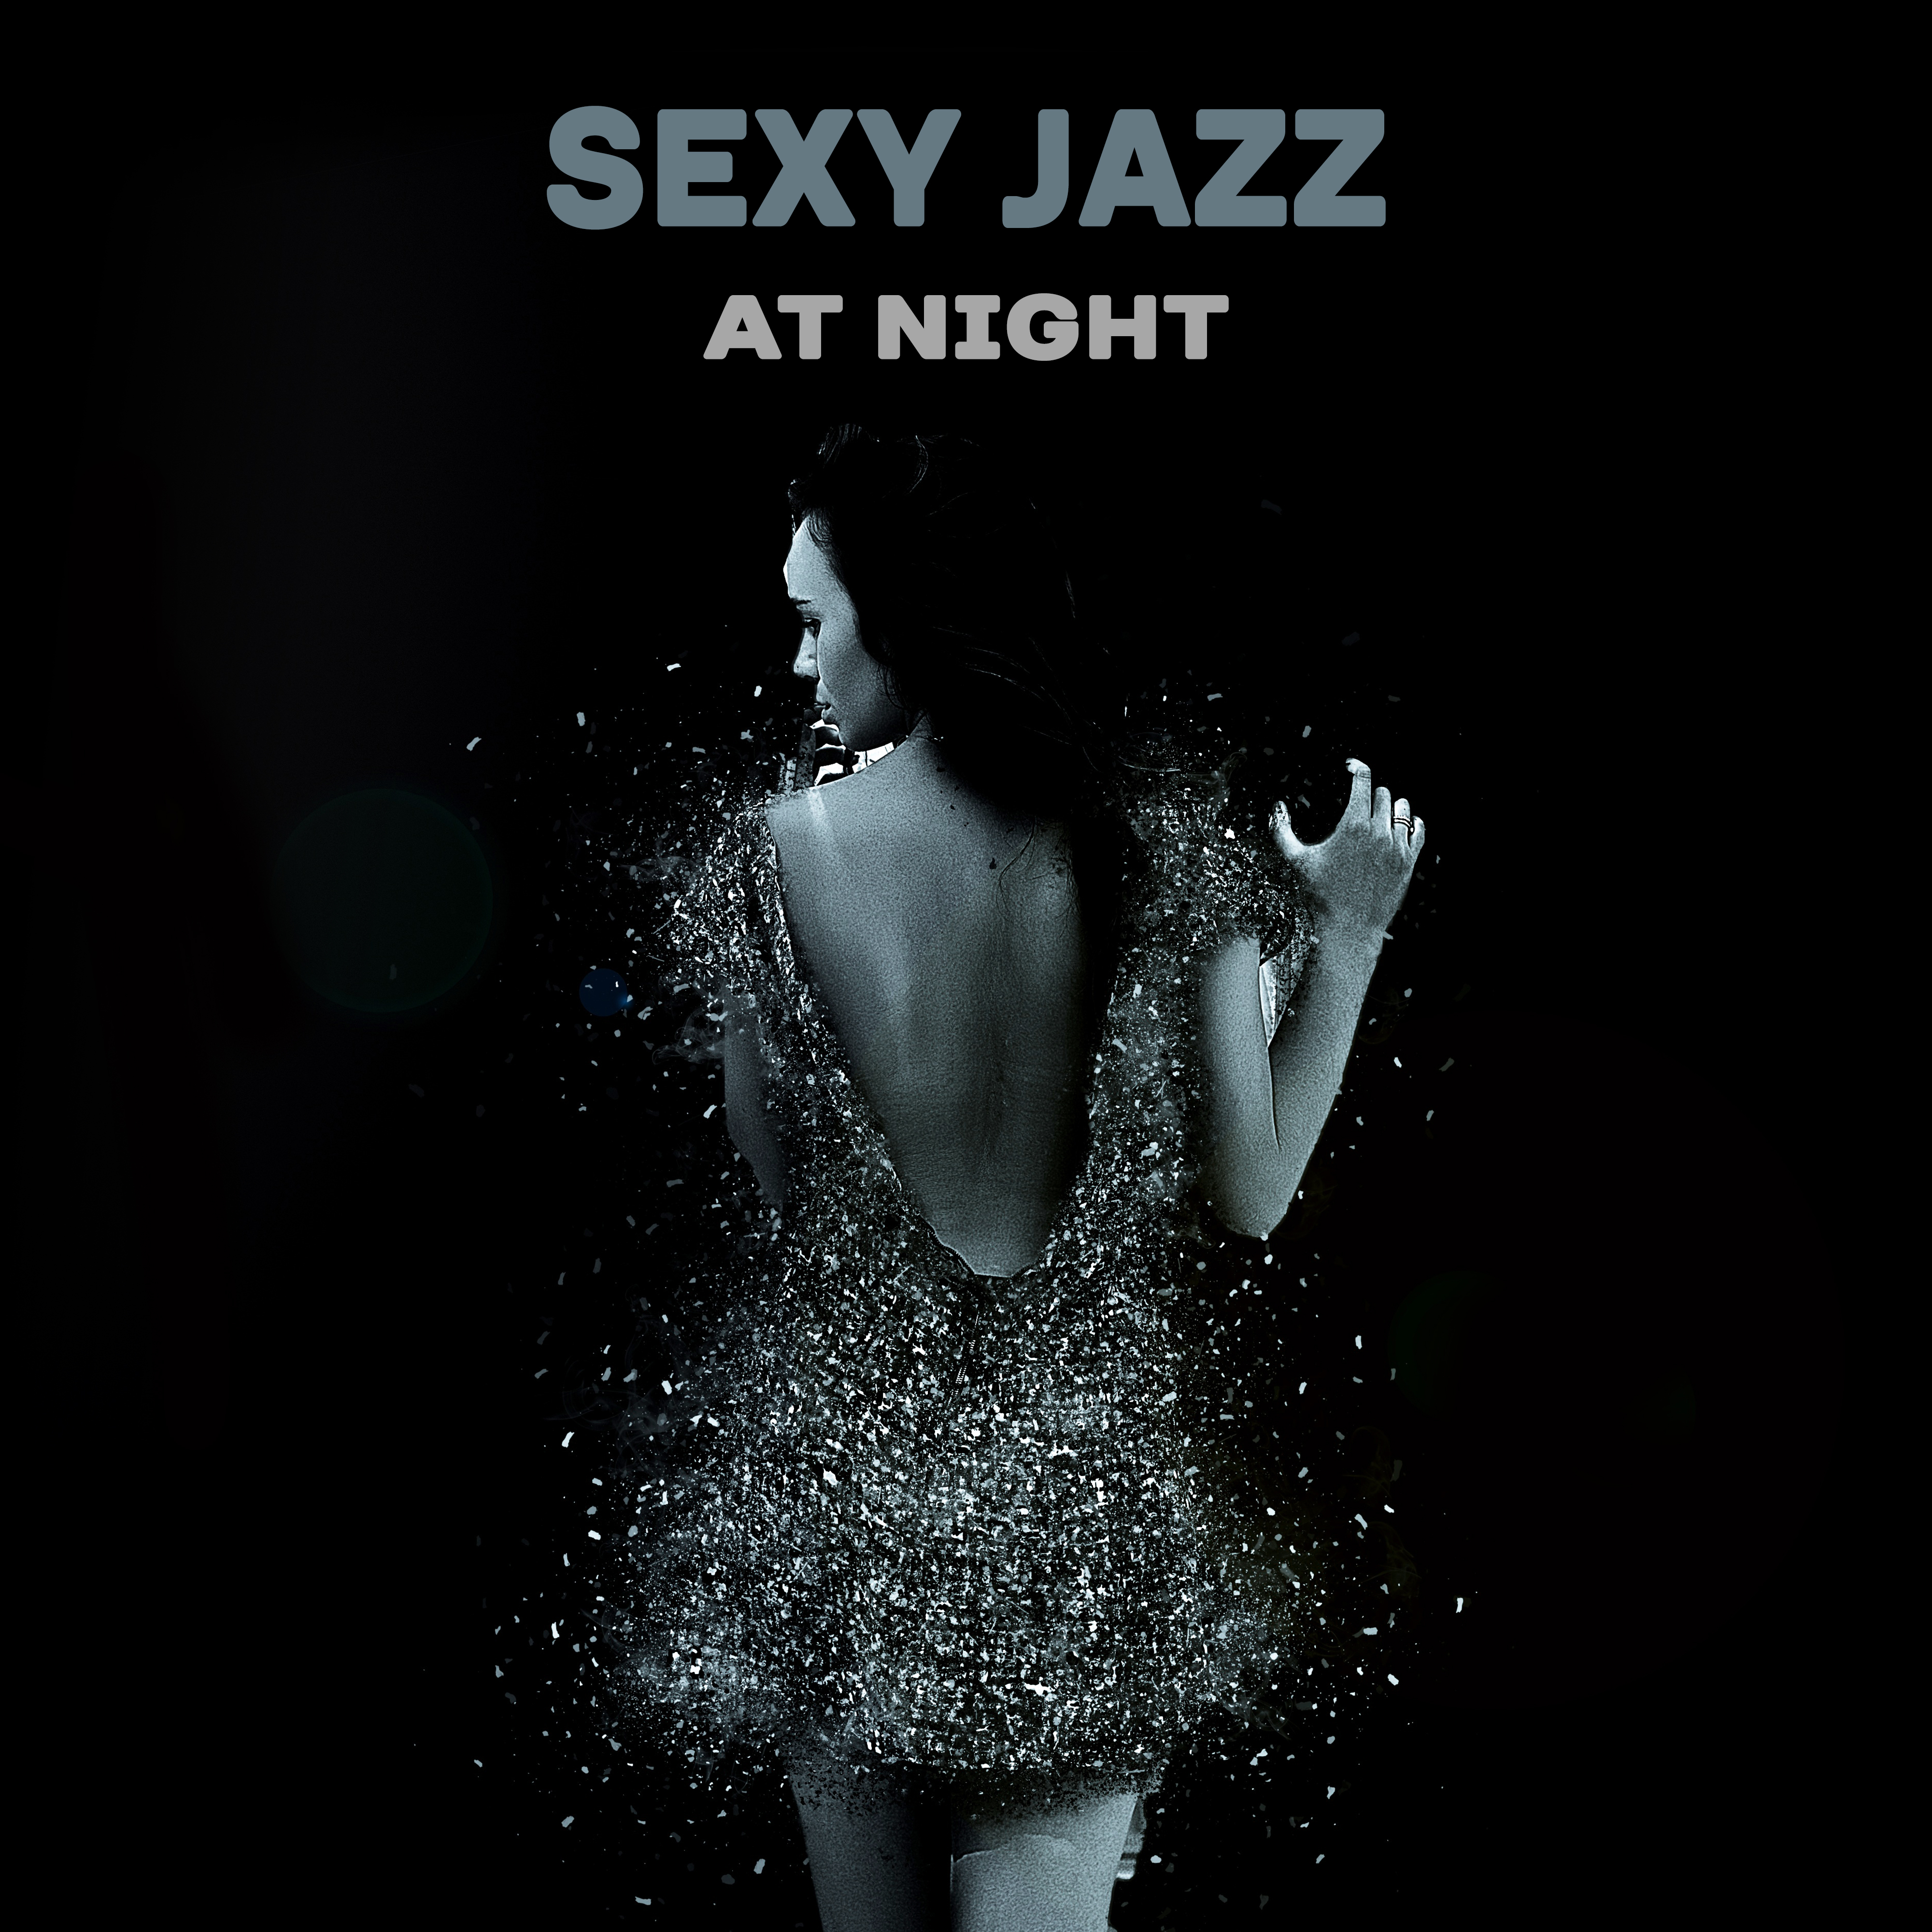 Sexy Jazz at Night – Sensual Music for Lovers, Erotic Lounge, Deep Massage, Tantric Sex, Romantic Night, Gentle Piano, Smooth Jazz